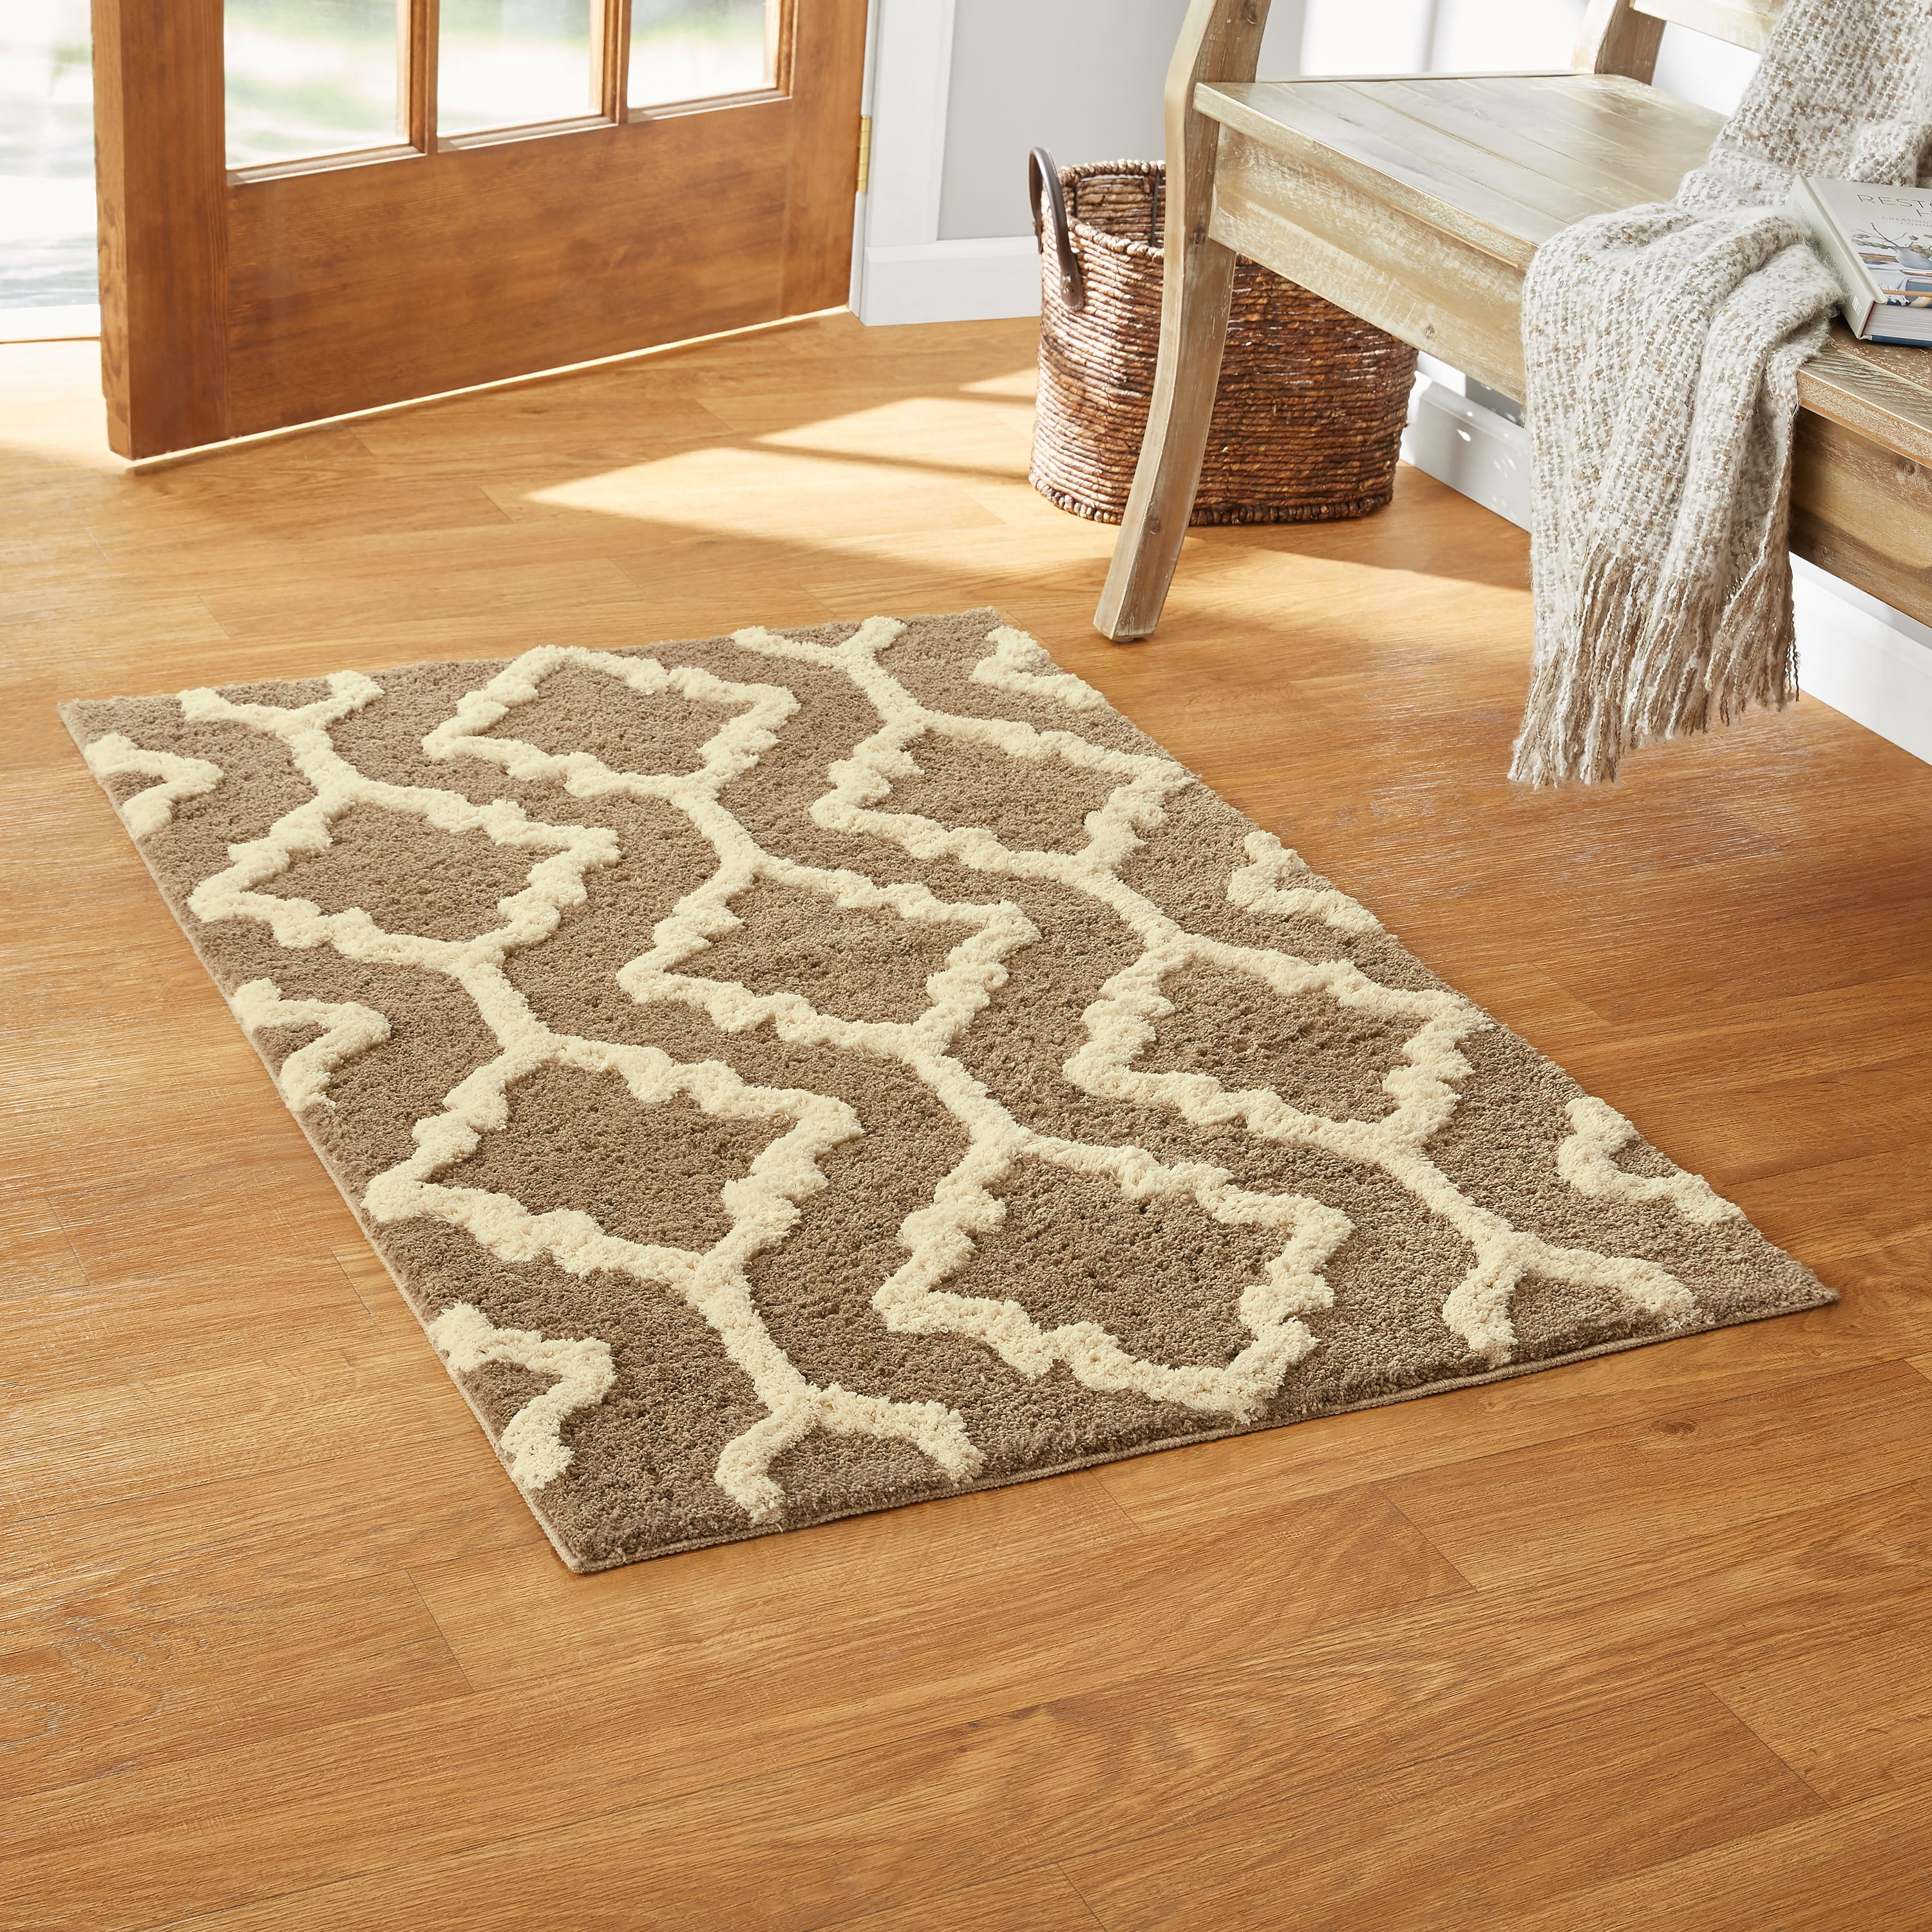 Better Homes & Gardens Geo Shag Indoor Entryway Rug, Taupe 30"x44